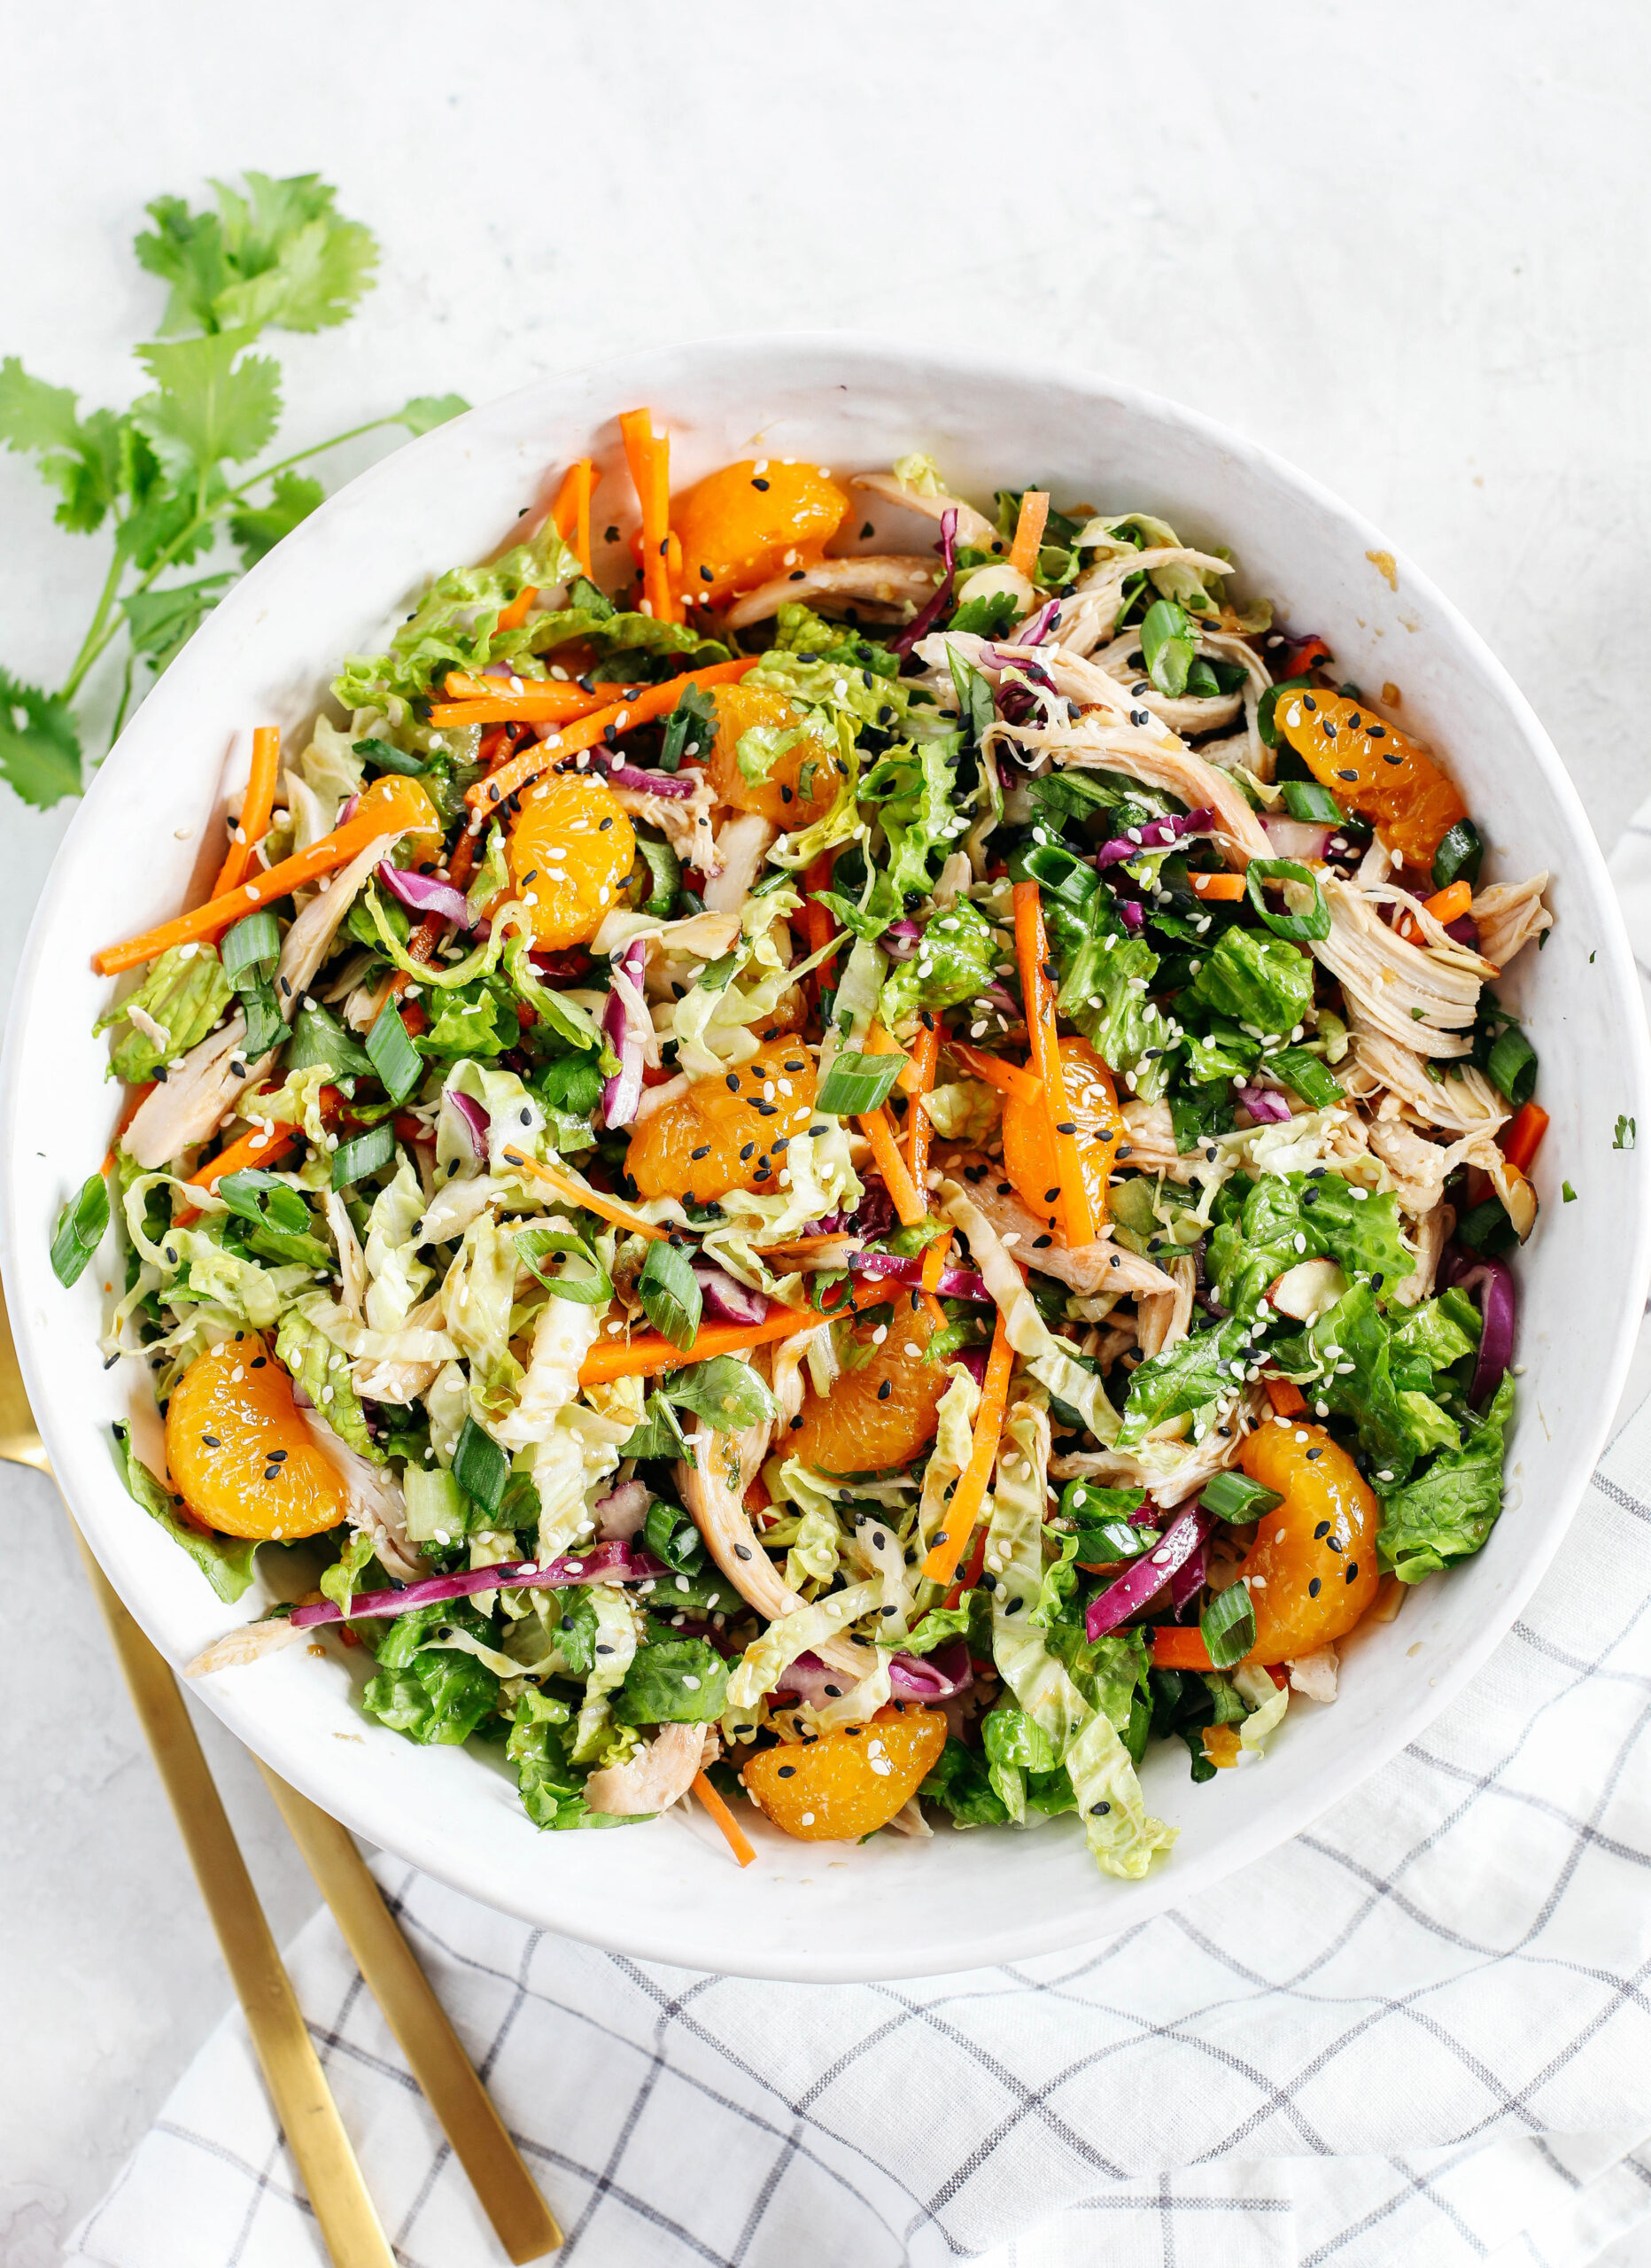 This Chinese Chicken Salad is loaded with fresh lettuce, cabbage, carrots, sweet mandarin oranges, crunchy almonds and cilantro all tossed together with a delicious ginger-sesame vinaigrette!